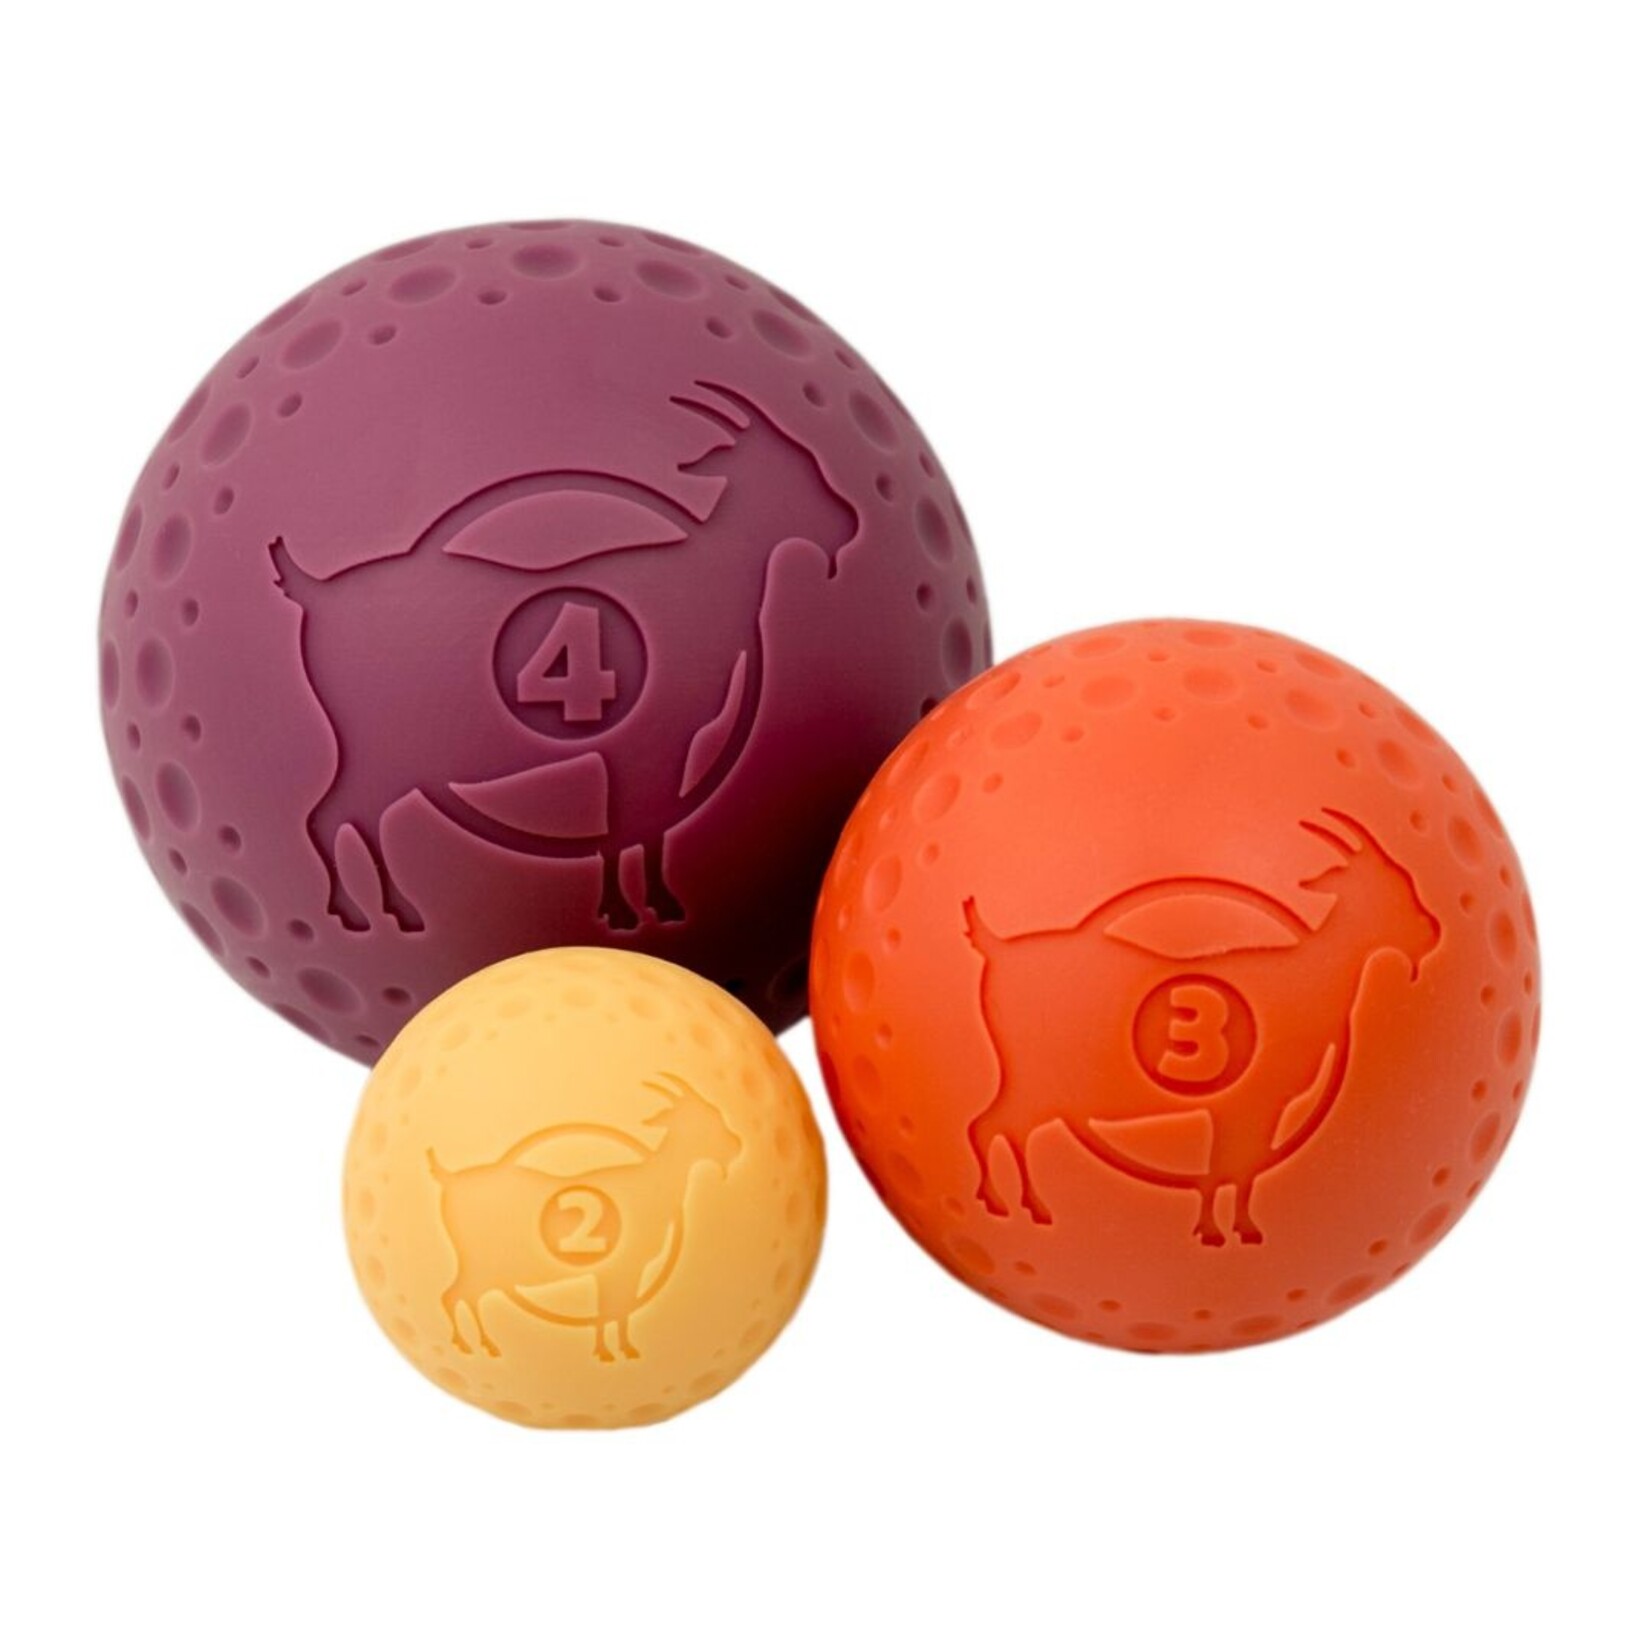 Tall Tails Tall Tails Natural Rubber GOAT Sport Ball